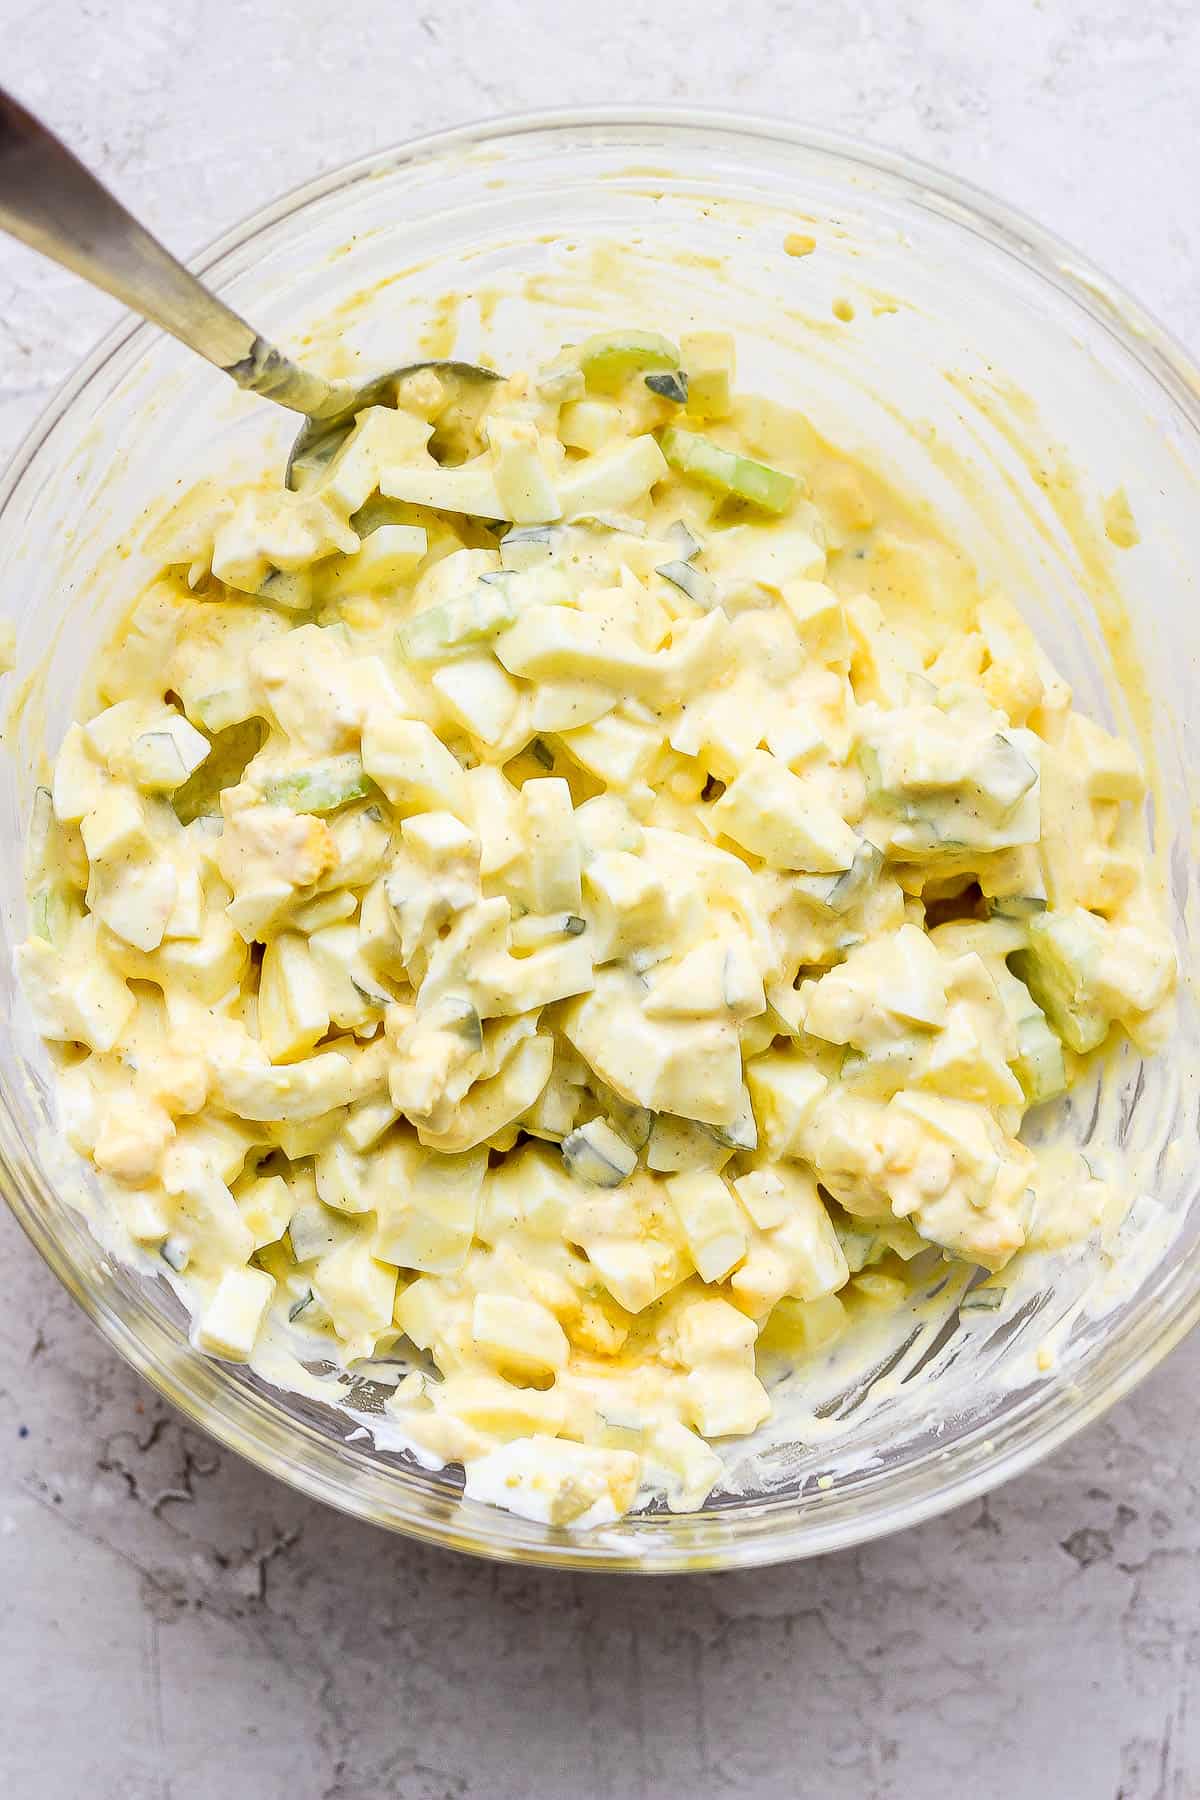 All of the egg salad ingredients mixed together in one bowl.